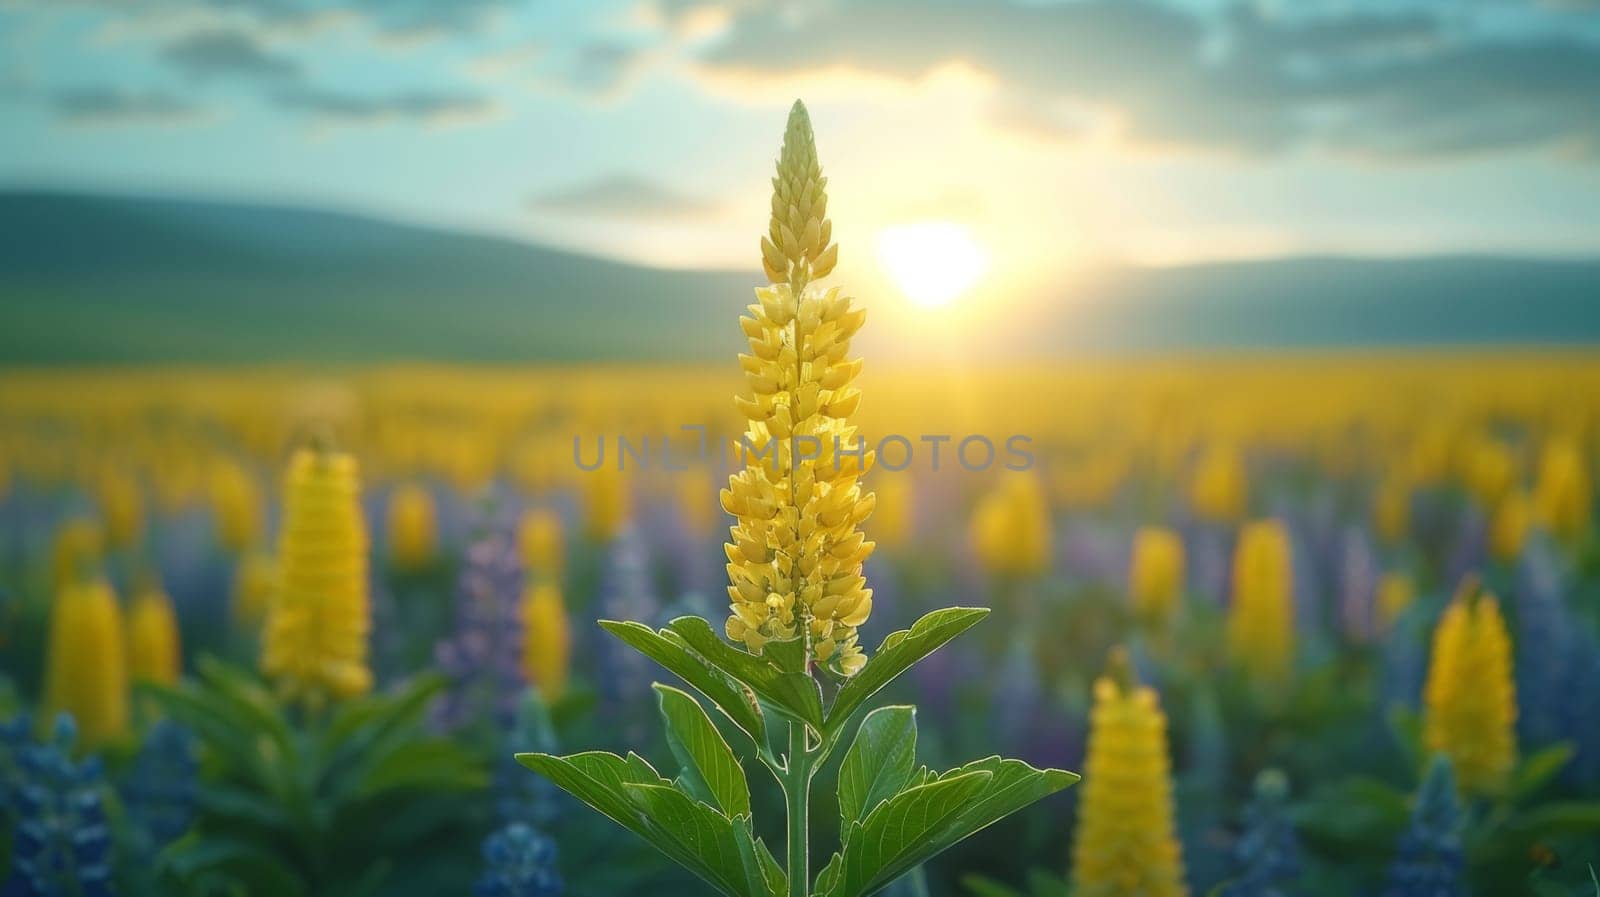 A field of yellow flowers with a sun setting in the background